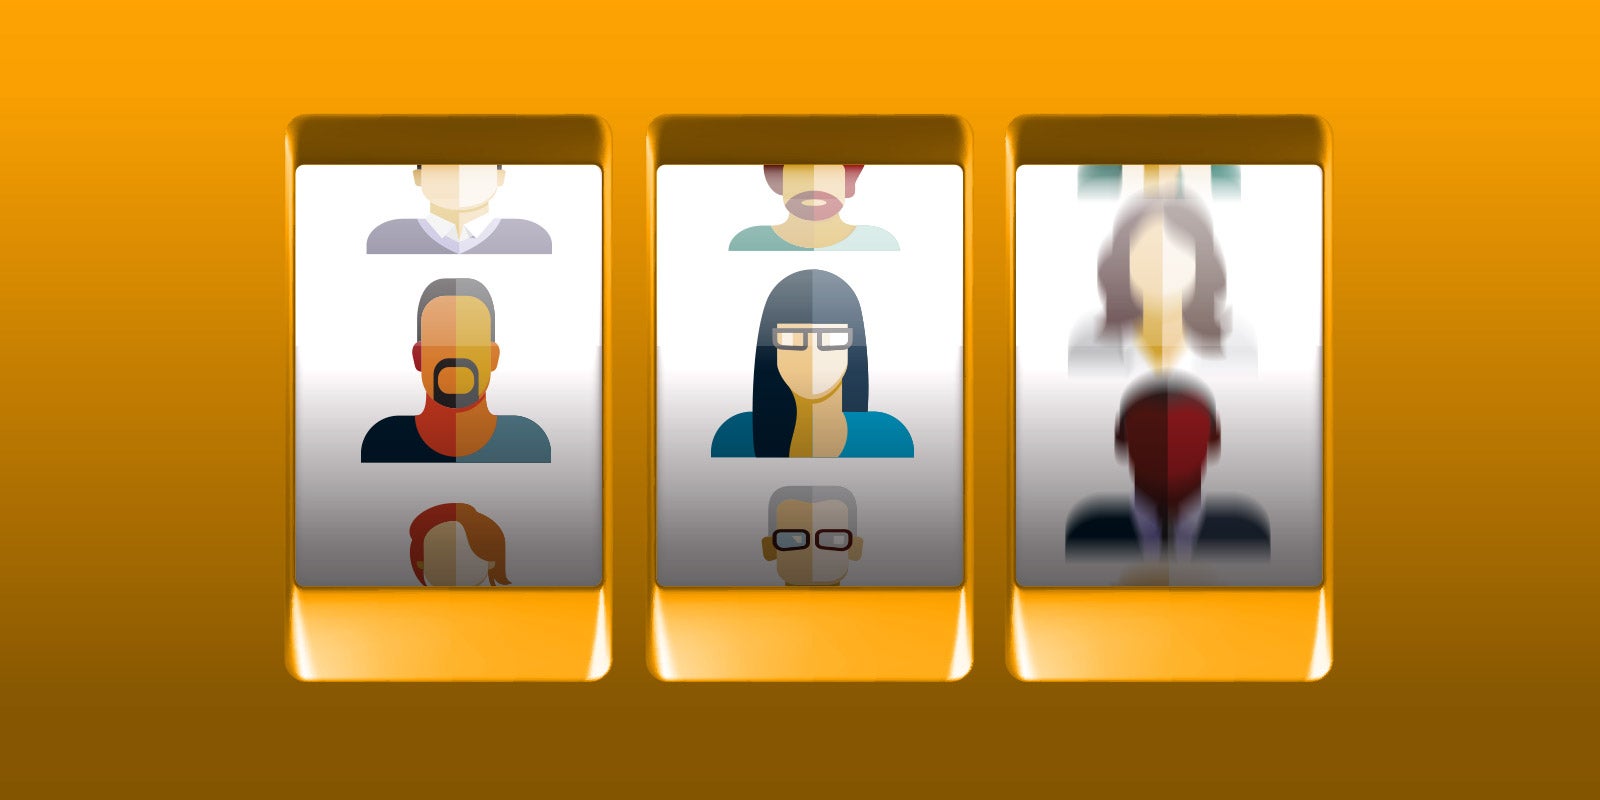 an animated slot machine zoomed in on animated people shown as the icons to symbolize leaving leadership training to chance